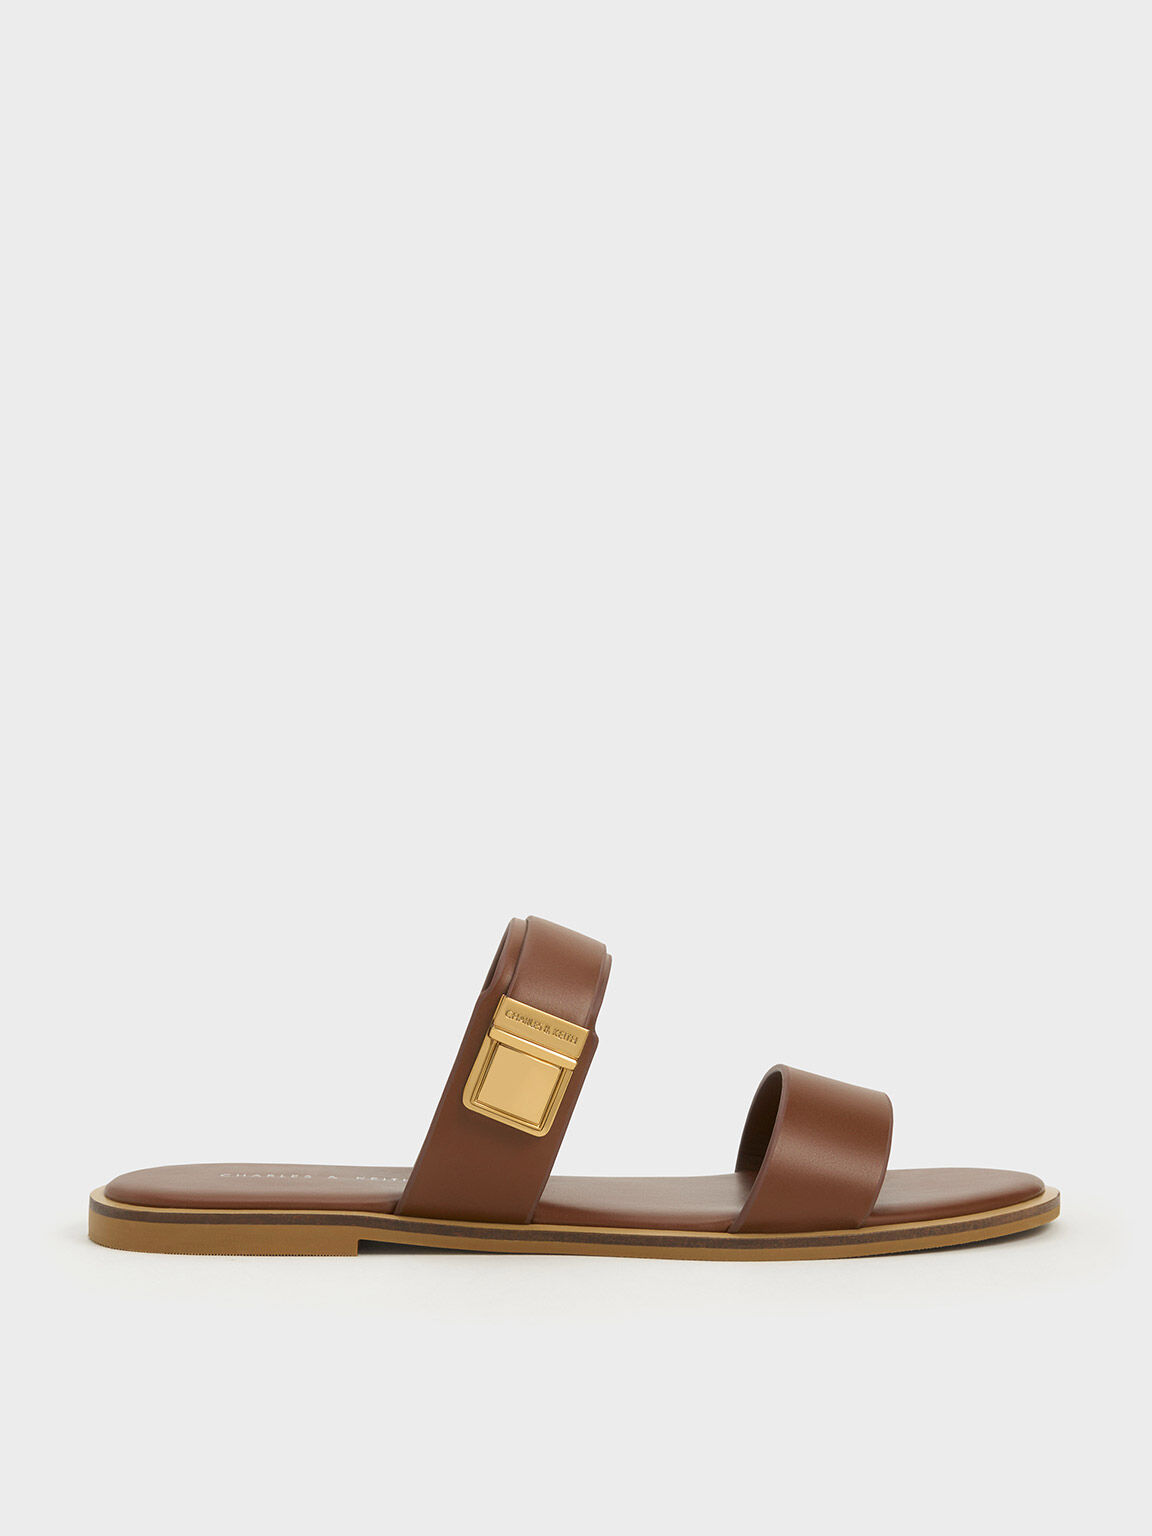 Buy Green Plain Vegan Leather Double Strap Sandals For Men by Schon Zapato  Online at Aza Fashions.